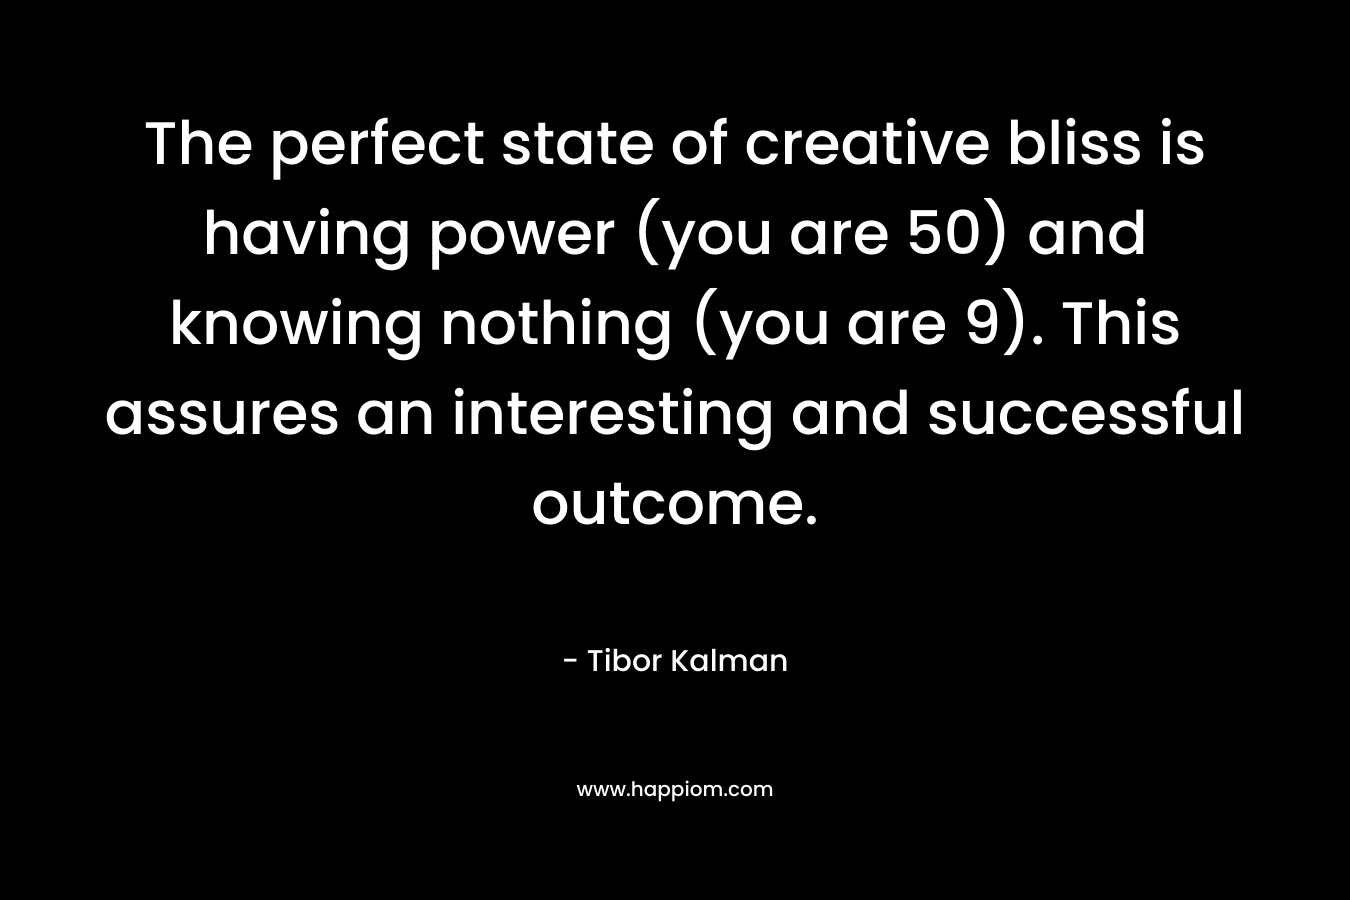 The perfect state of creative bliss is having power (you are 50) and knowing nothing (you are 9). This assures an interesting and successful outcome. – Tibor Kalman